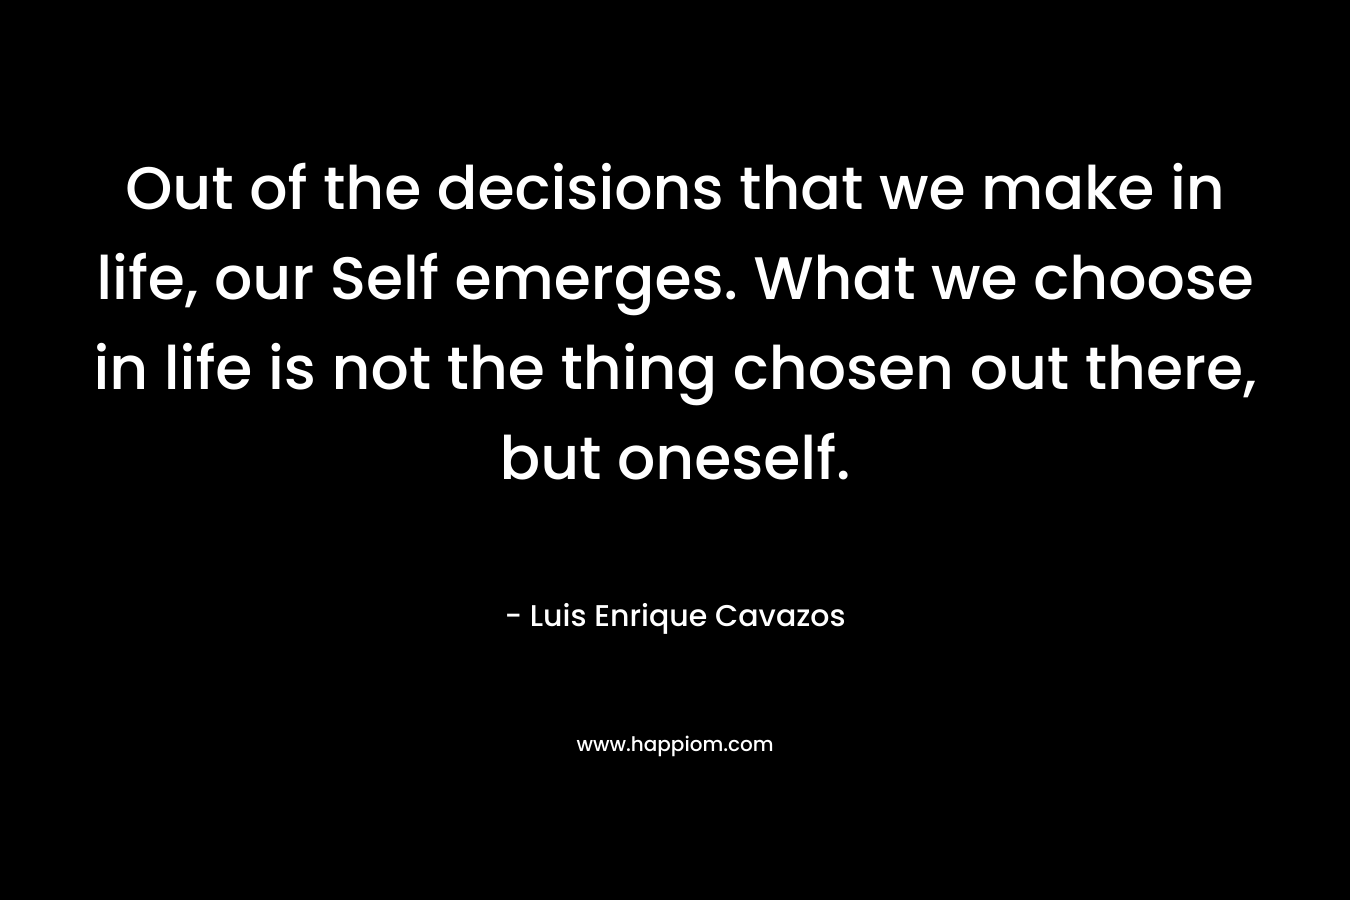 Out of the decisions that we make in life, our Self emerges. What we choose in life is not the thing chosen out there, but oneself. – Luis Enrique Cavazos